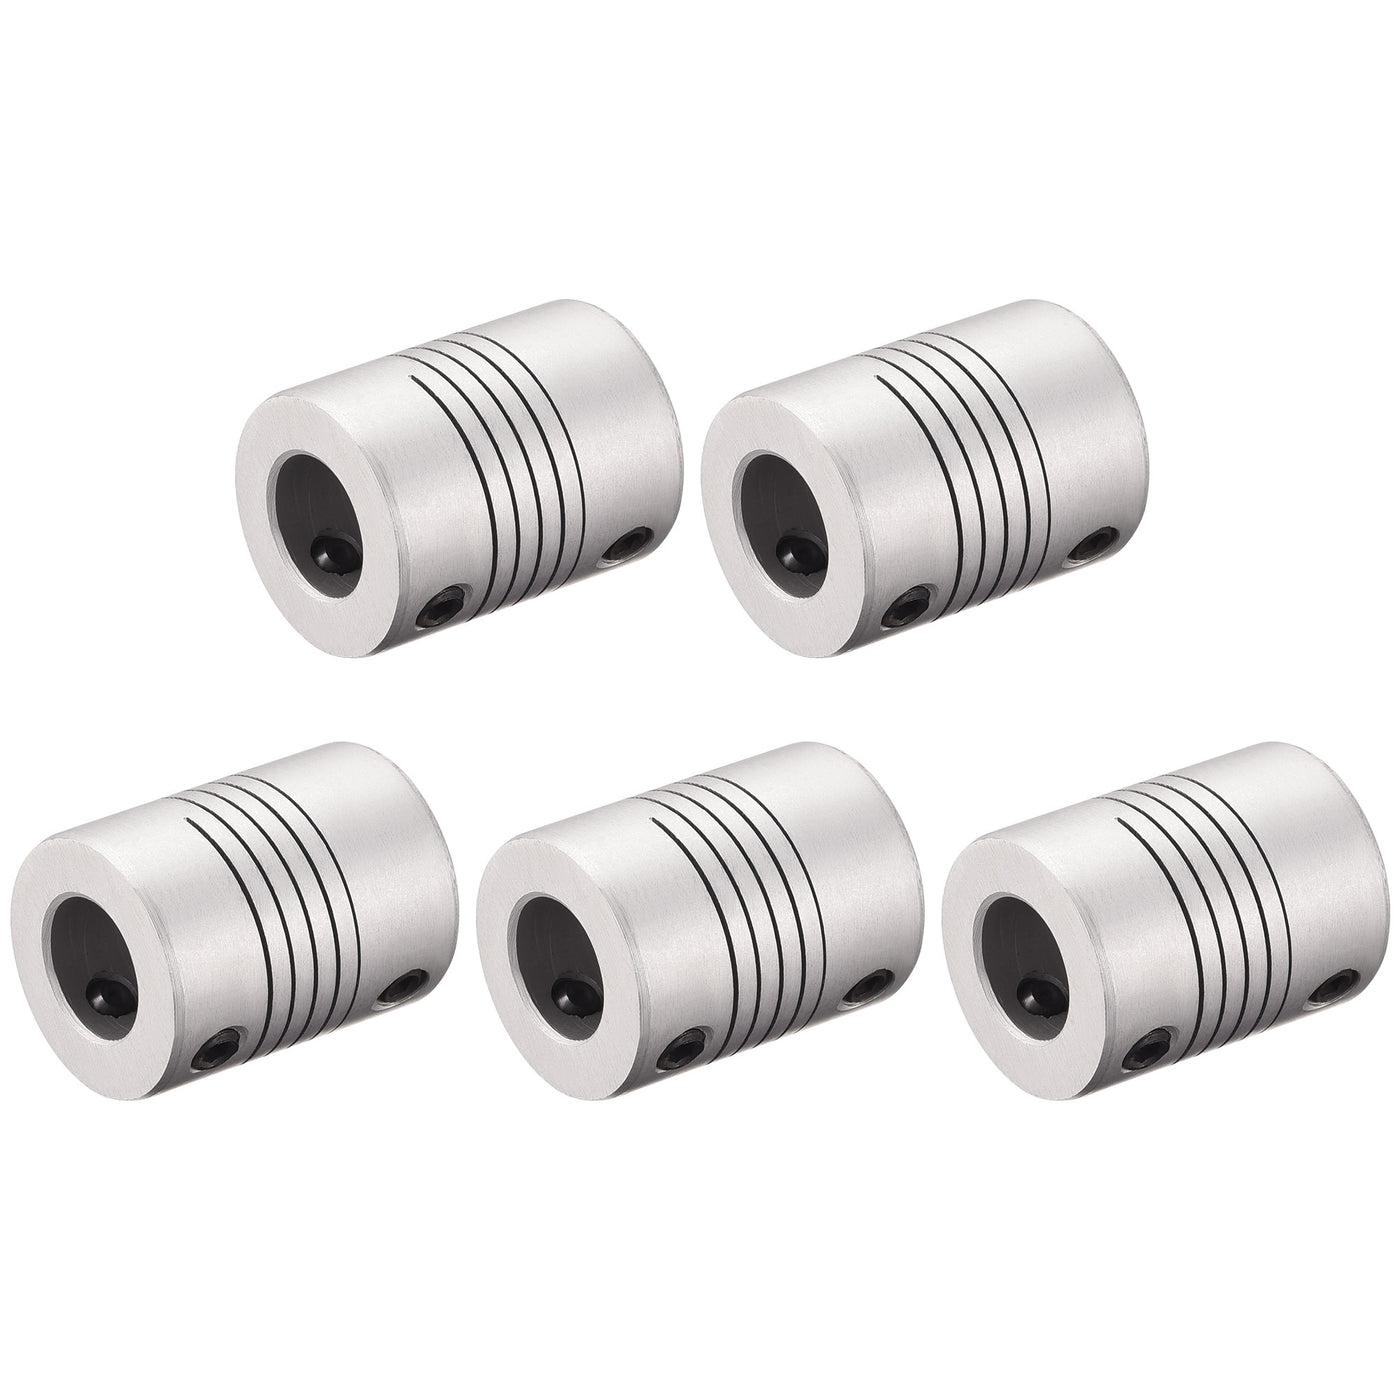 uxcell Uxcell 10mm to 10mm Aluminum Alloy Shaft Coupling Flexible Coupler L25xD19 Silver,5pcs